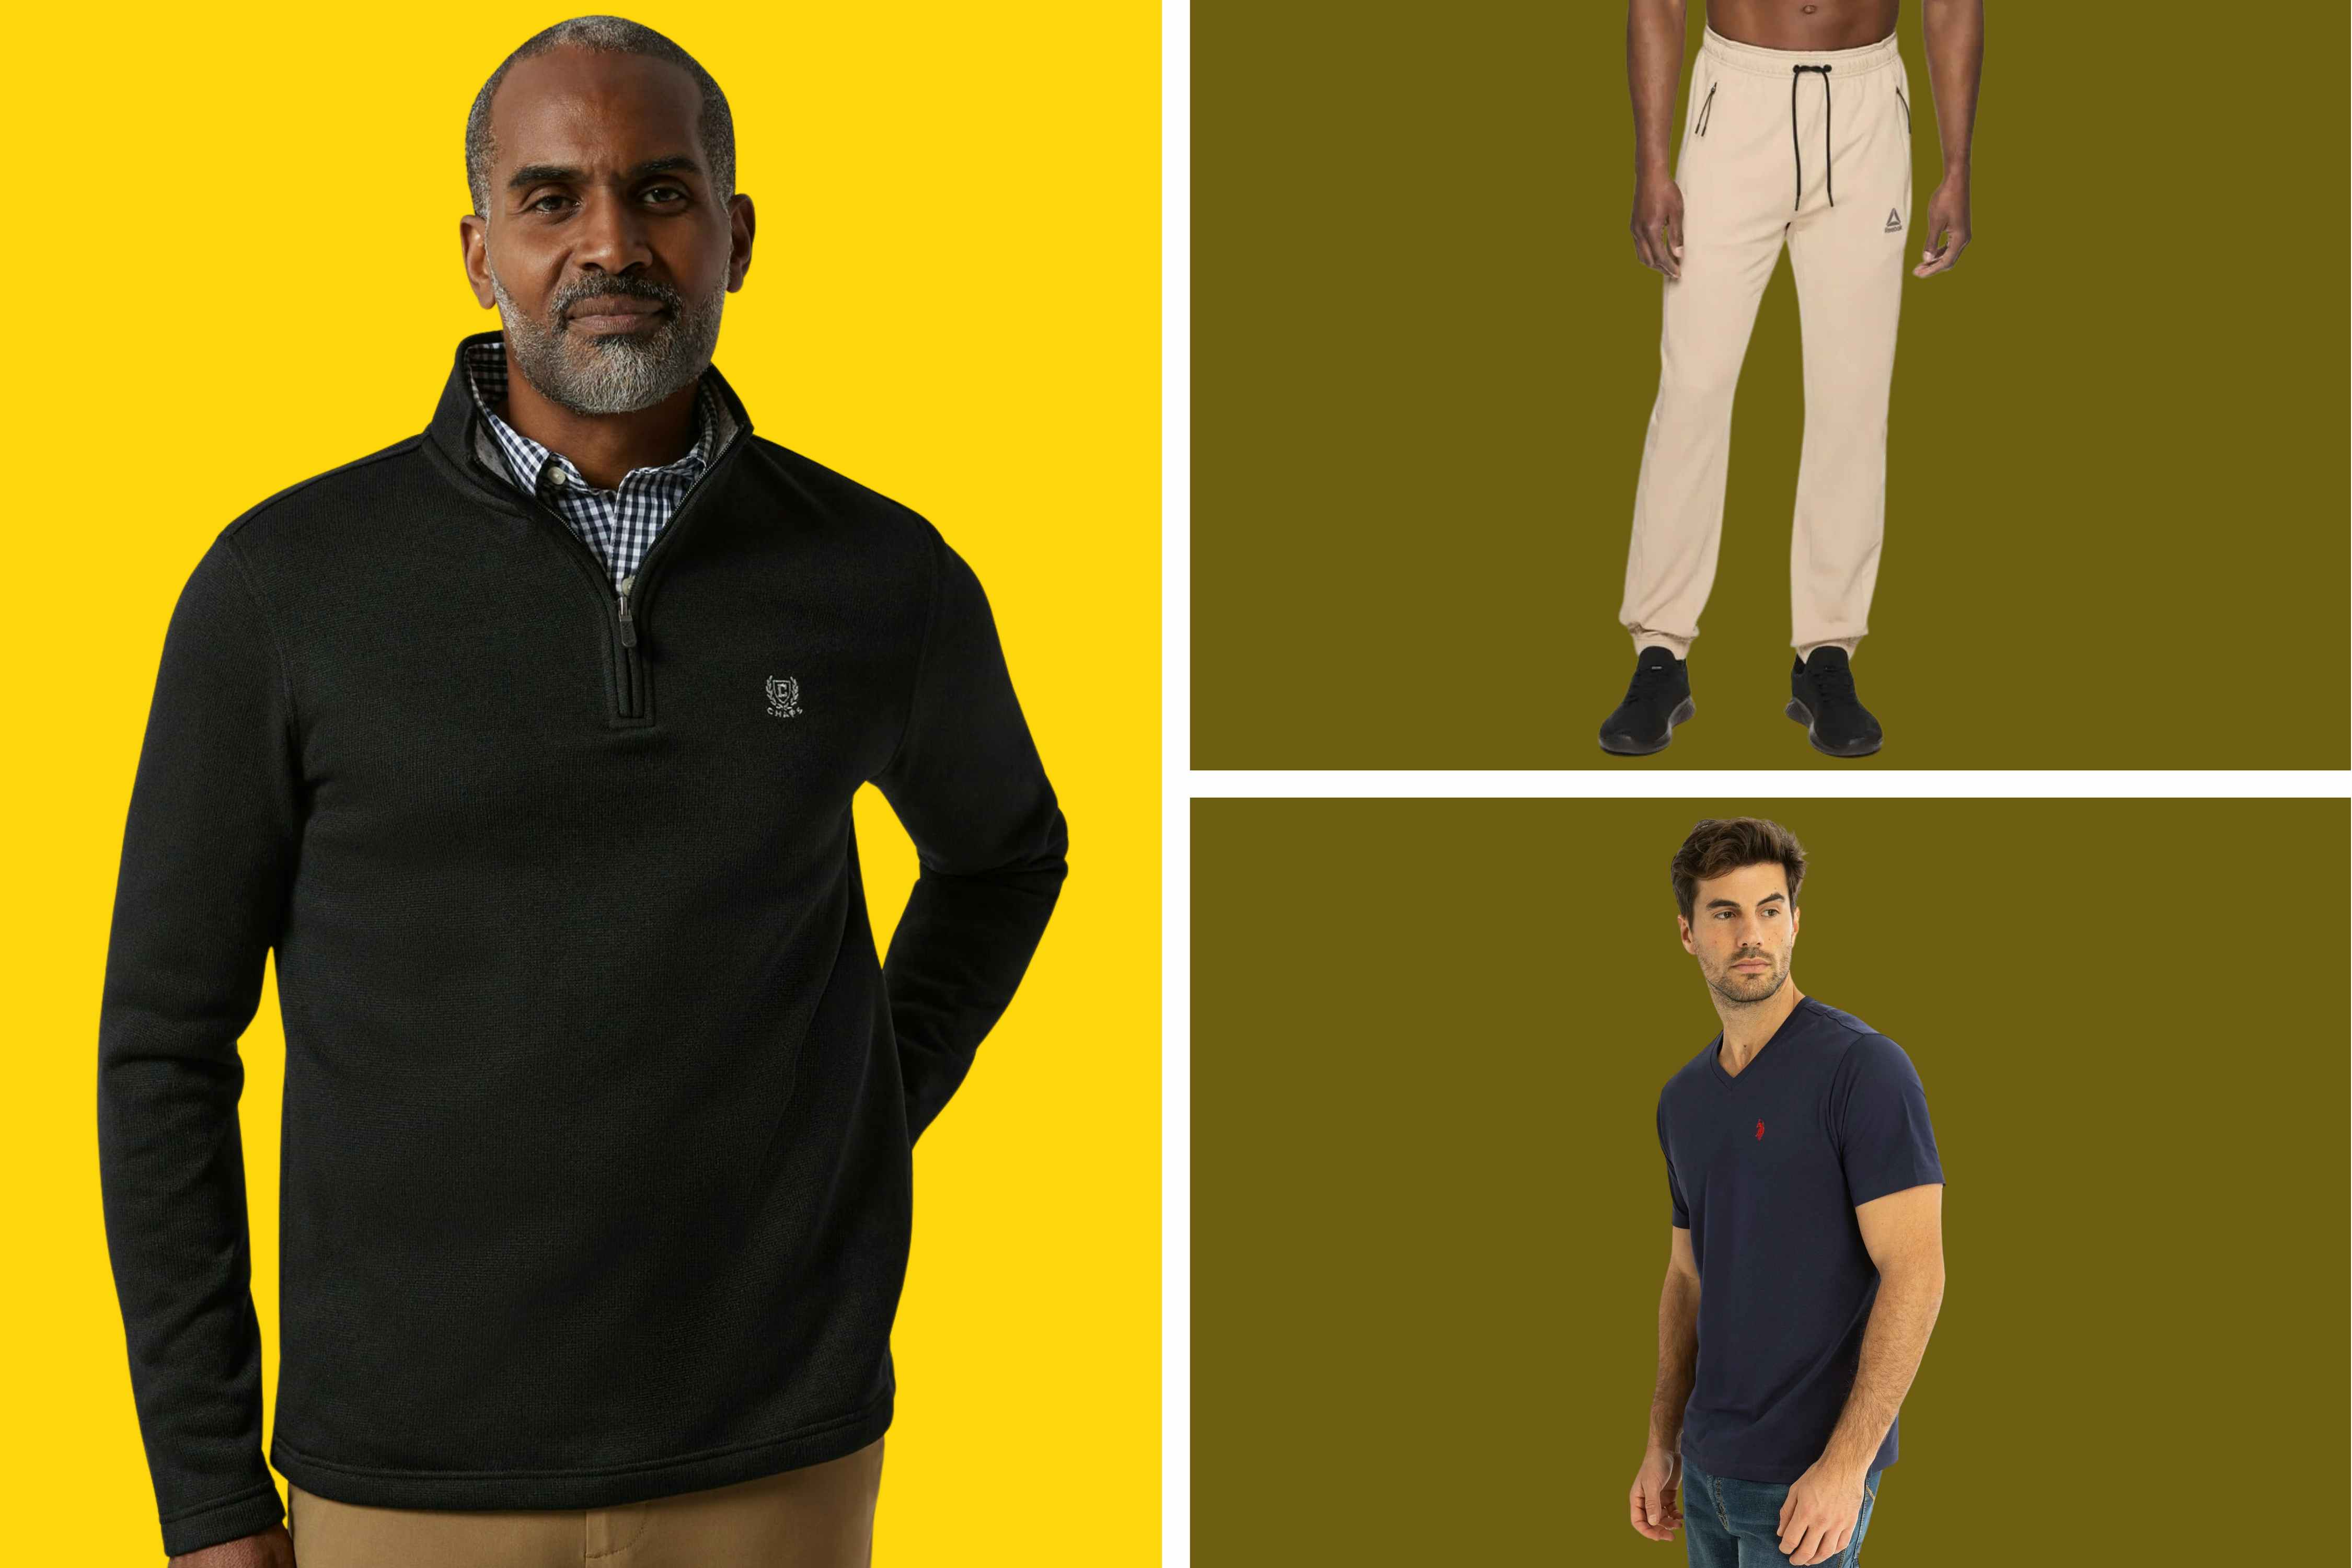 Men's Clearance at Walmart: $6 Sweaters, $15 Reebok Joggers, and More